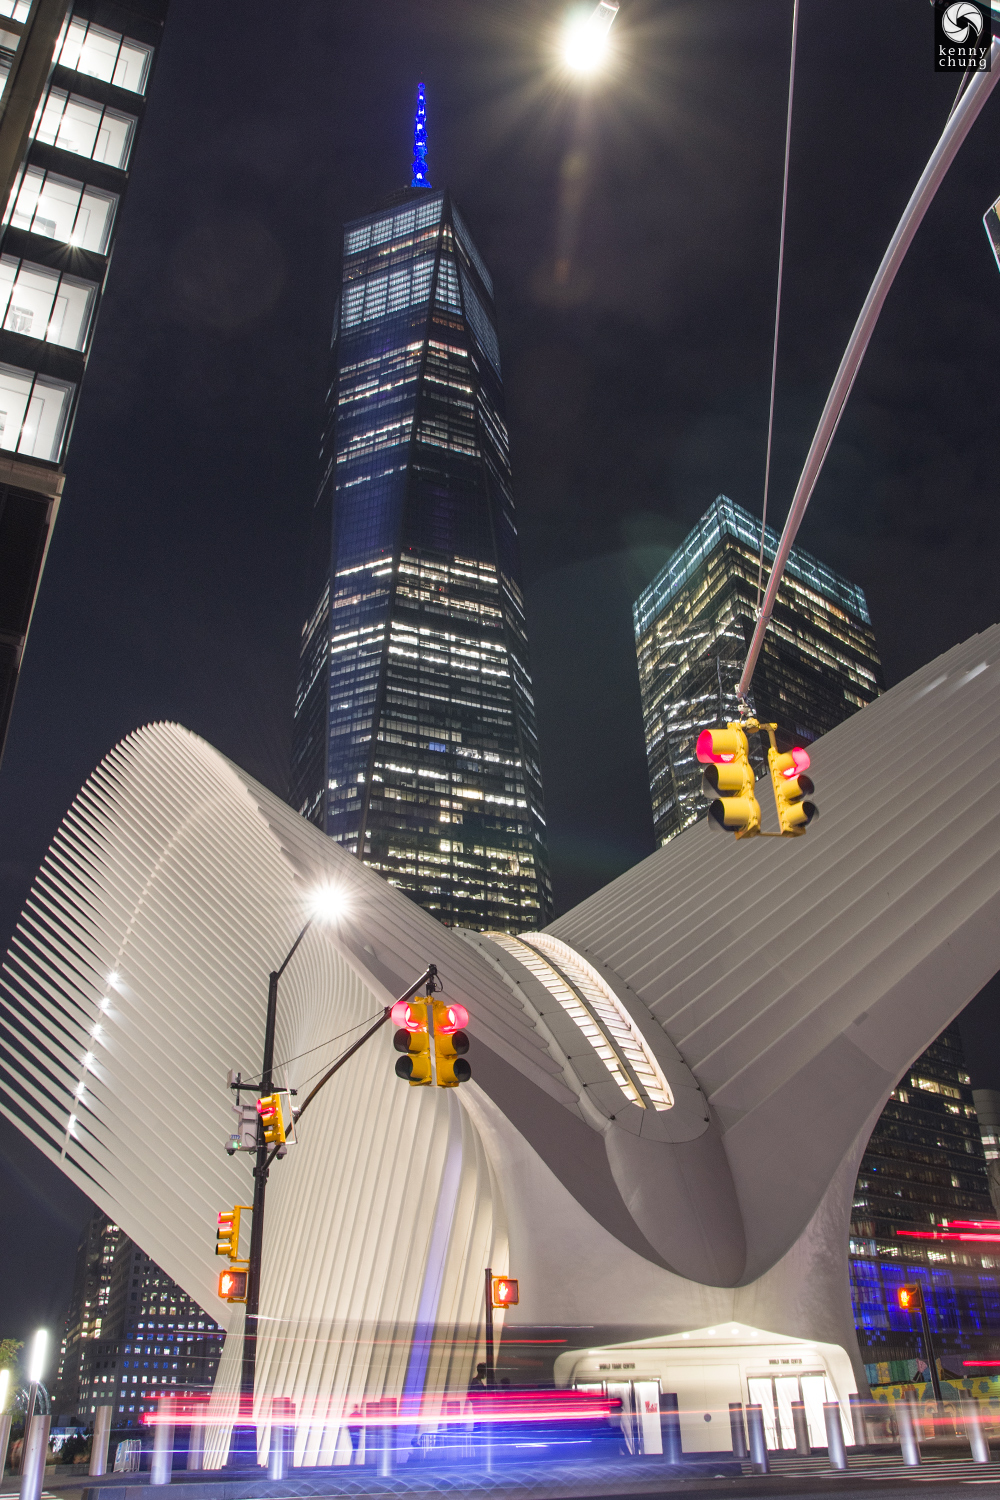 The Oculus and One World Trade Center/Freedom Tower